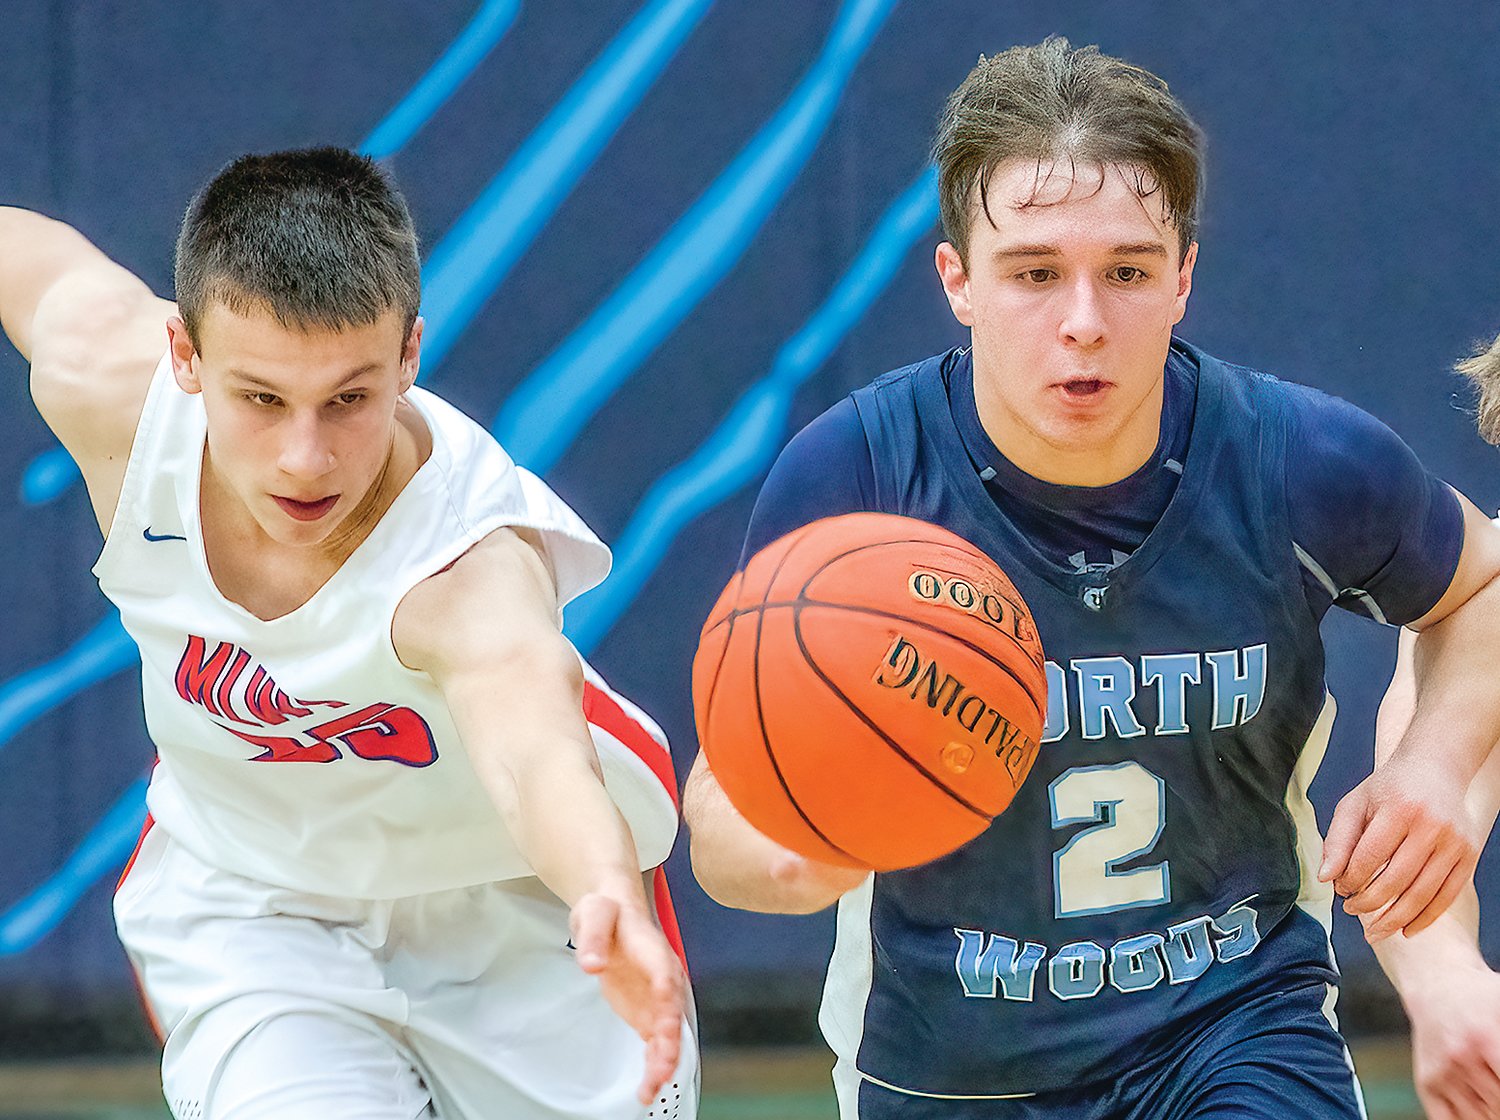 The Grizzlies’ Jared Chiabotti races ahead of a Moose Lake defender on a fast break.